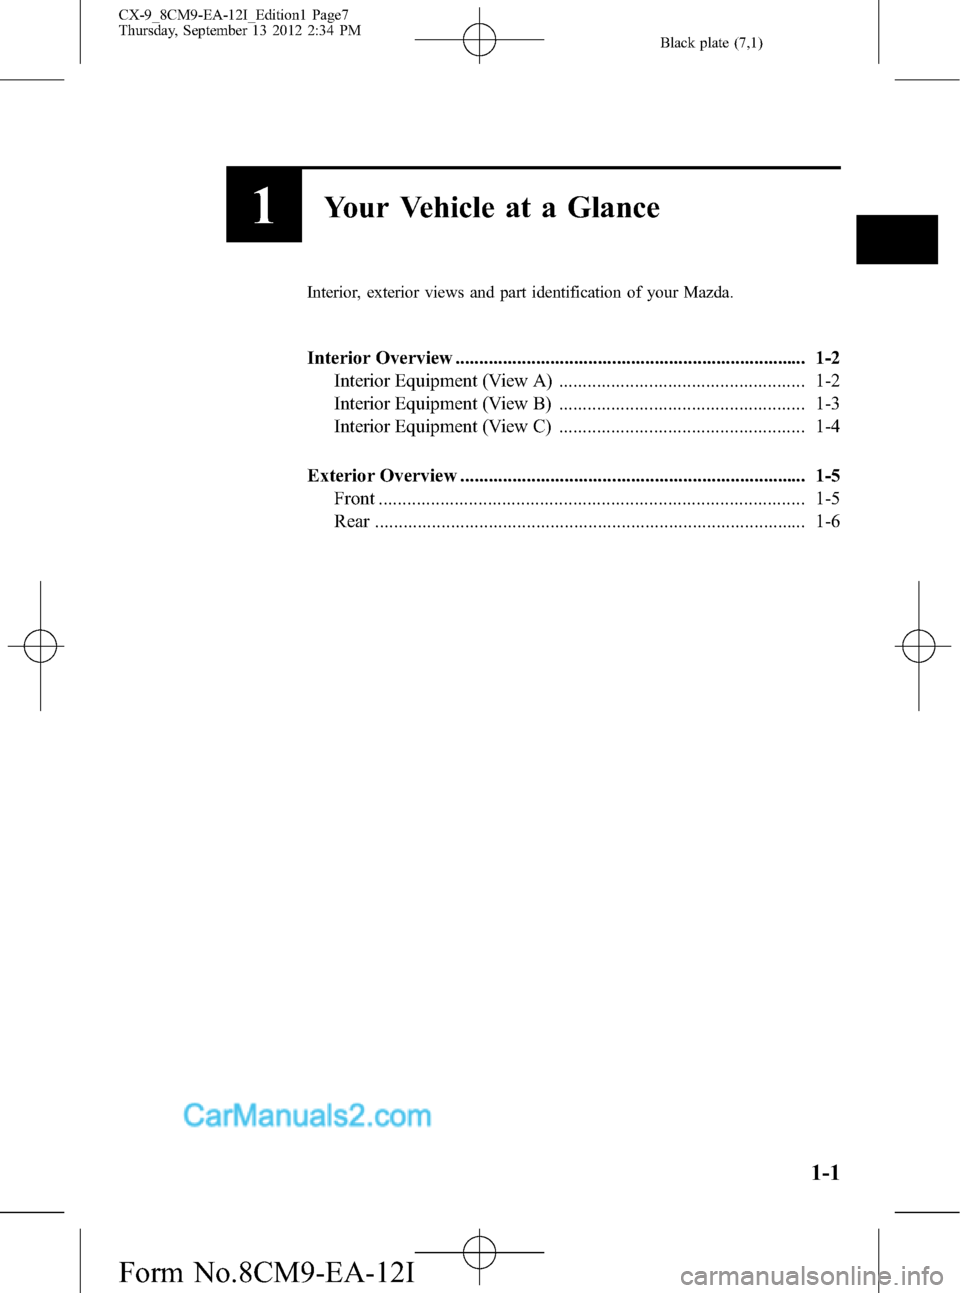 MAZDA MODEL CX-9 2013  Owners Manual (in English) Black plate (7,1)
1Your Vehicle at a Glance
Interior, exterior views and part identification of your Mazda.
Interior Overview ..........................................................................